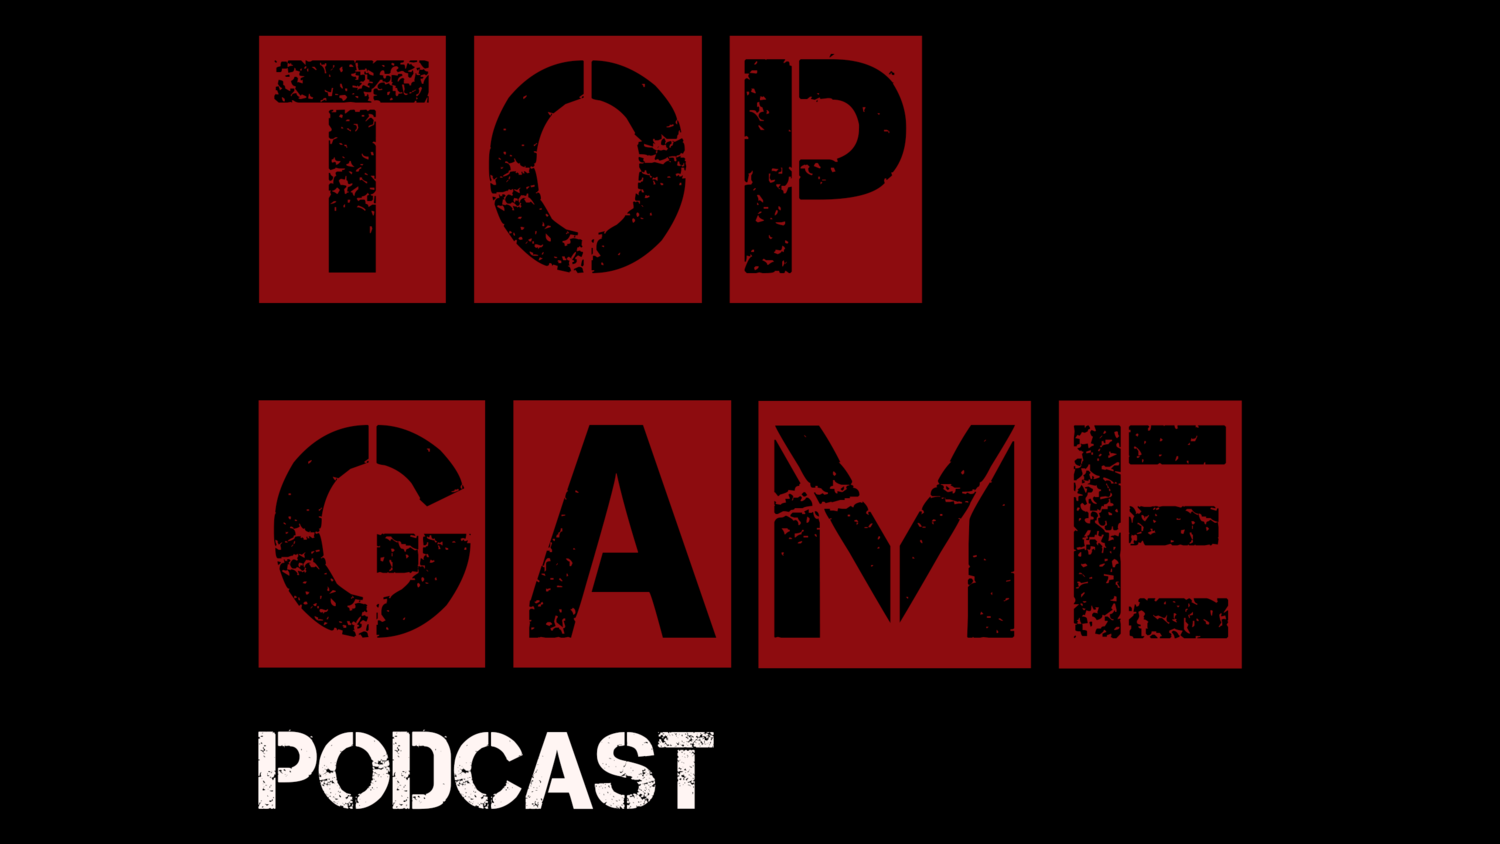 Top Game Podcast